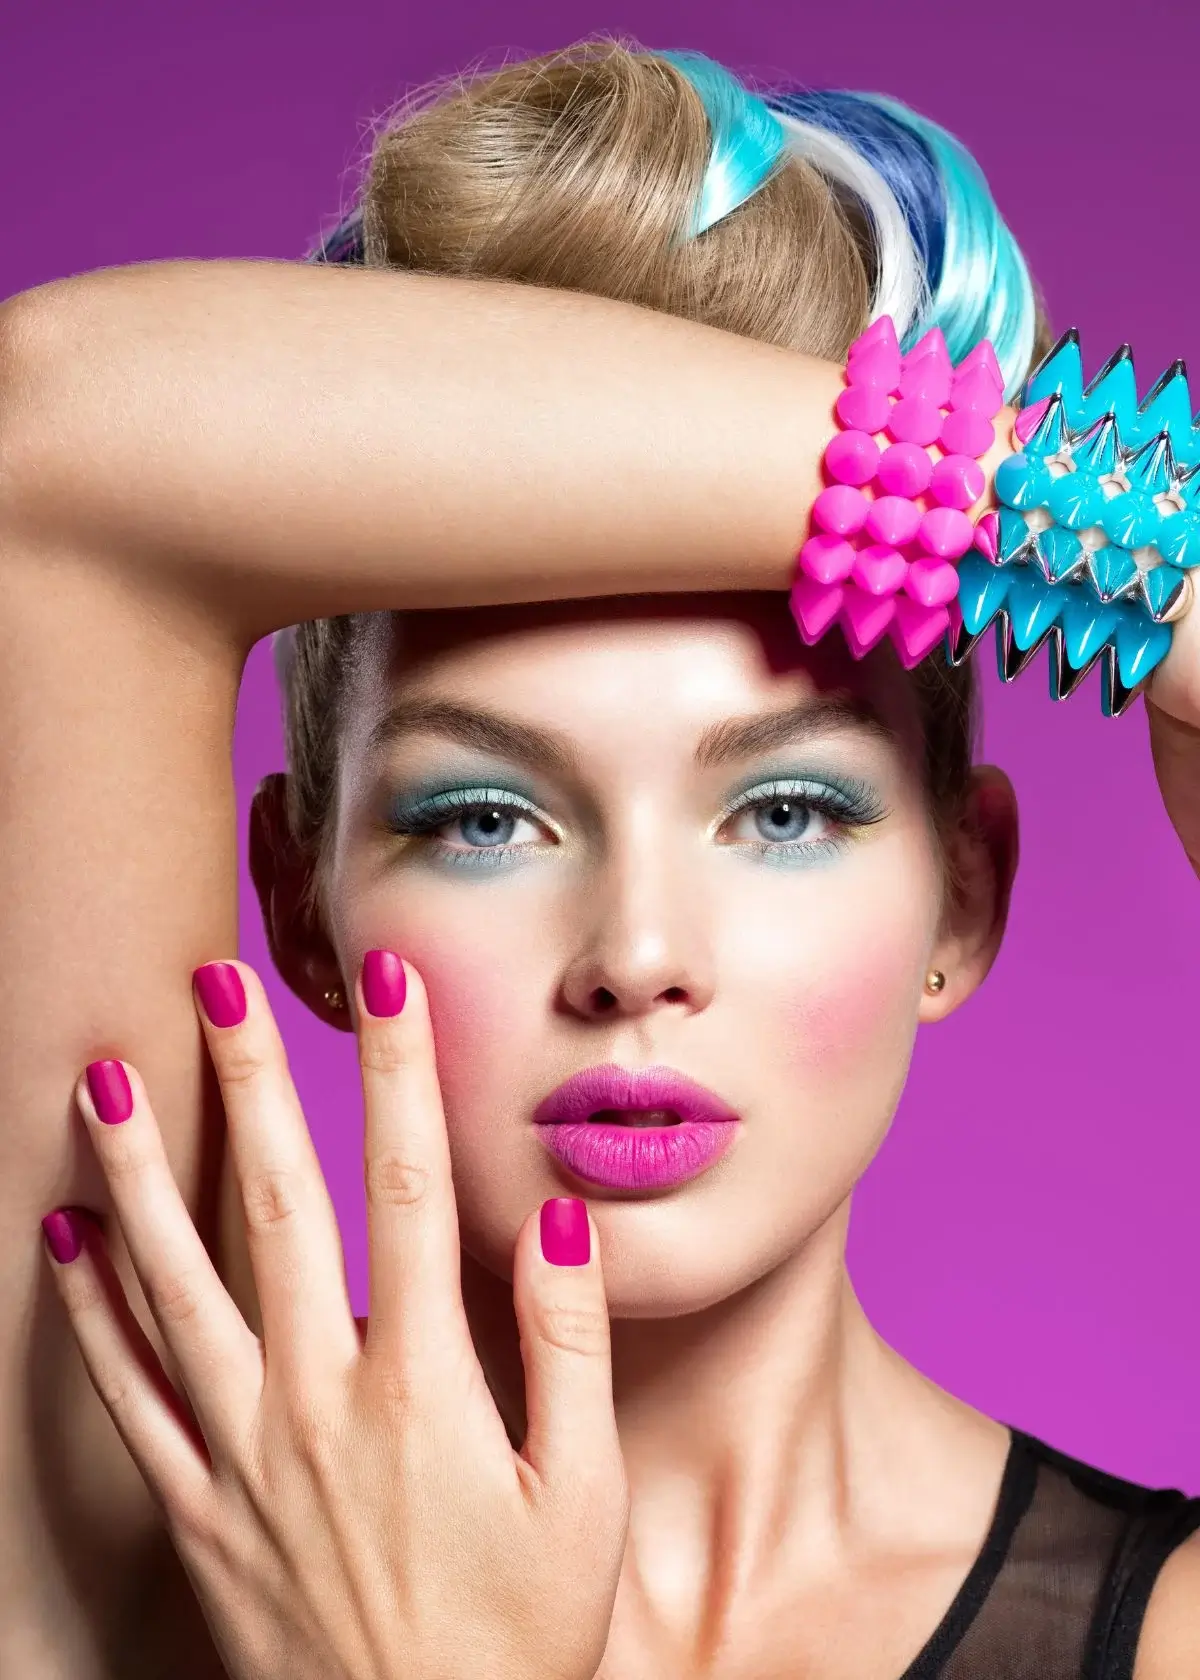 How does neon nail polish differ from regular polish?